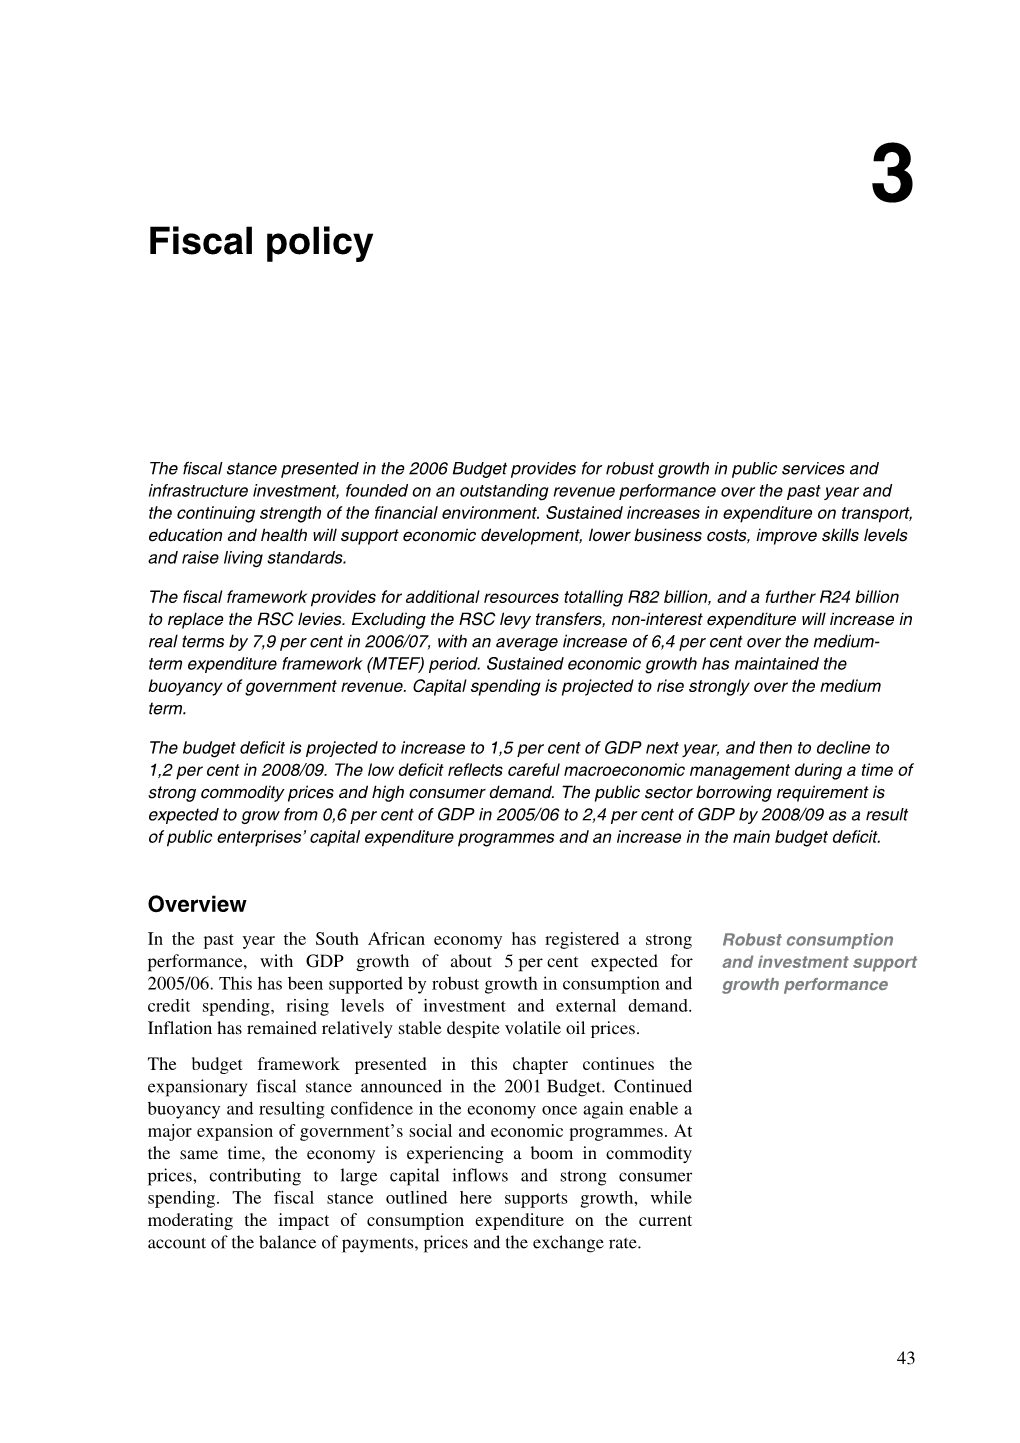 Fiscal Policy